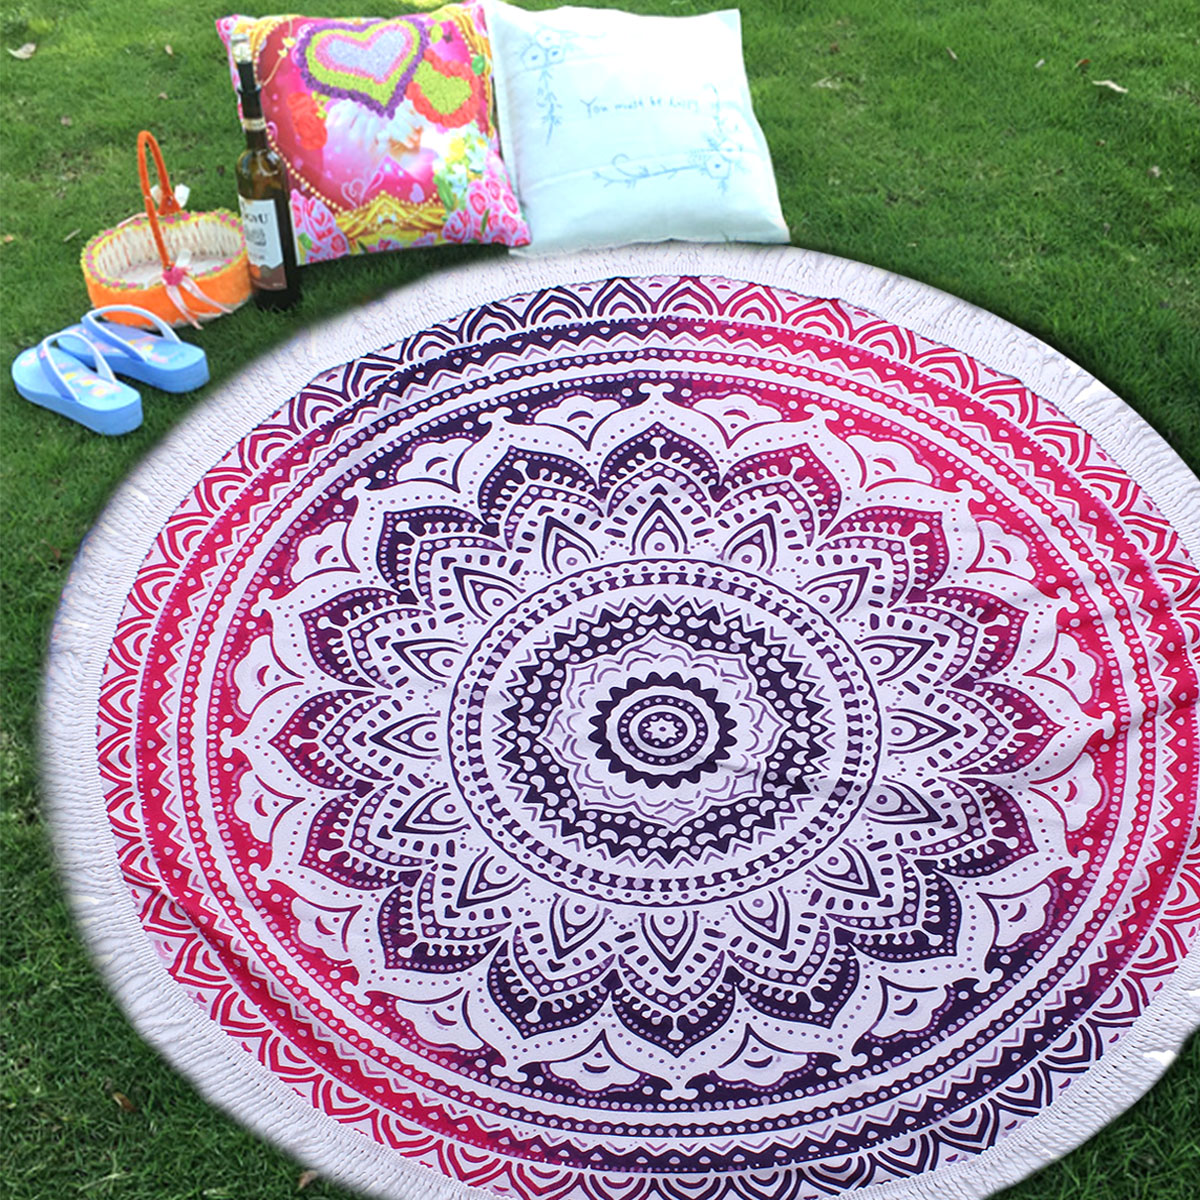 1M15M-Round-Beach-Towel-Tassel-Tapestry-Yoga-Mats-Blankets-Home-Fitness-Decoration-Accessories-1678169-3